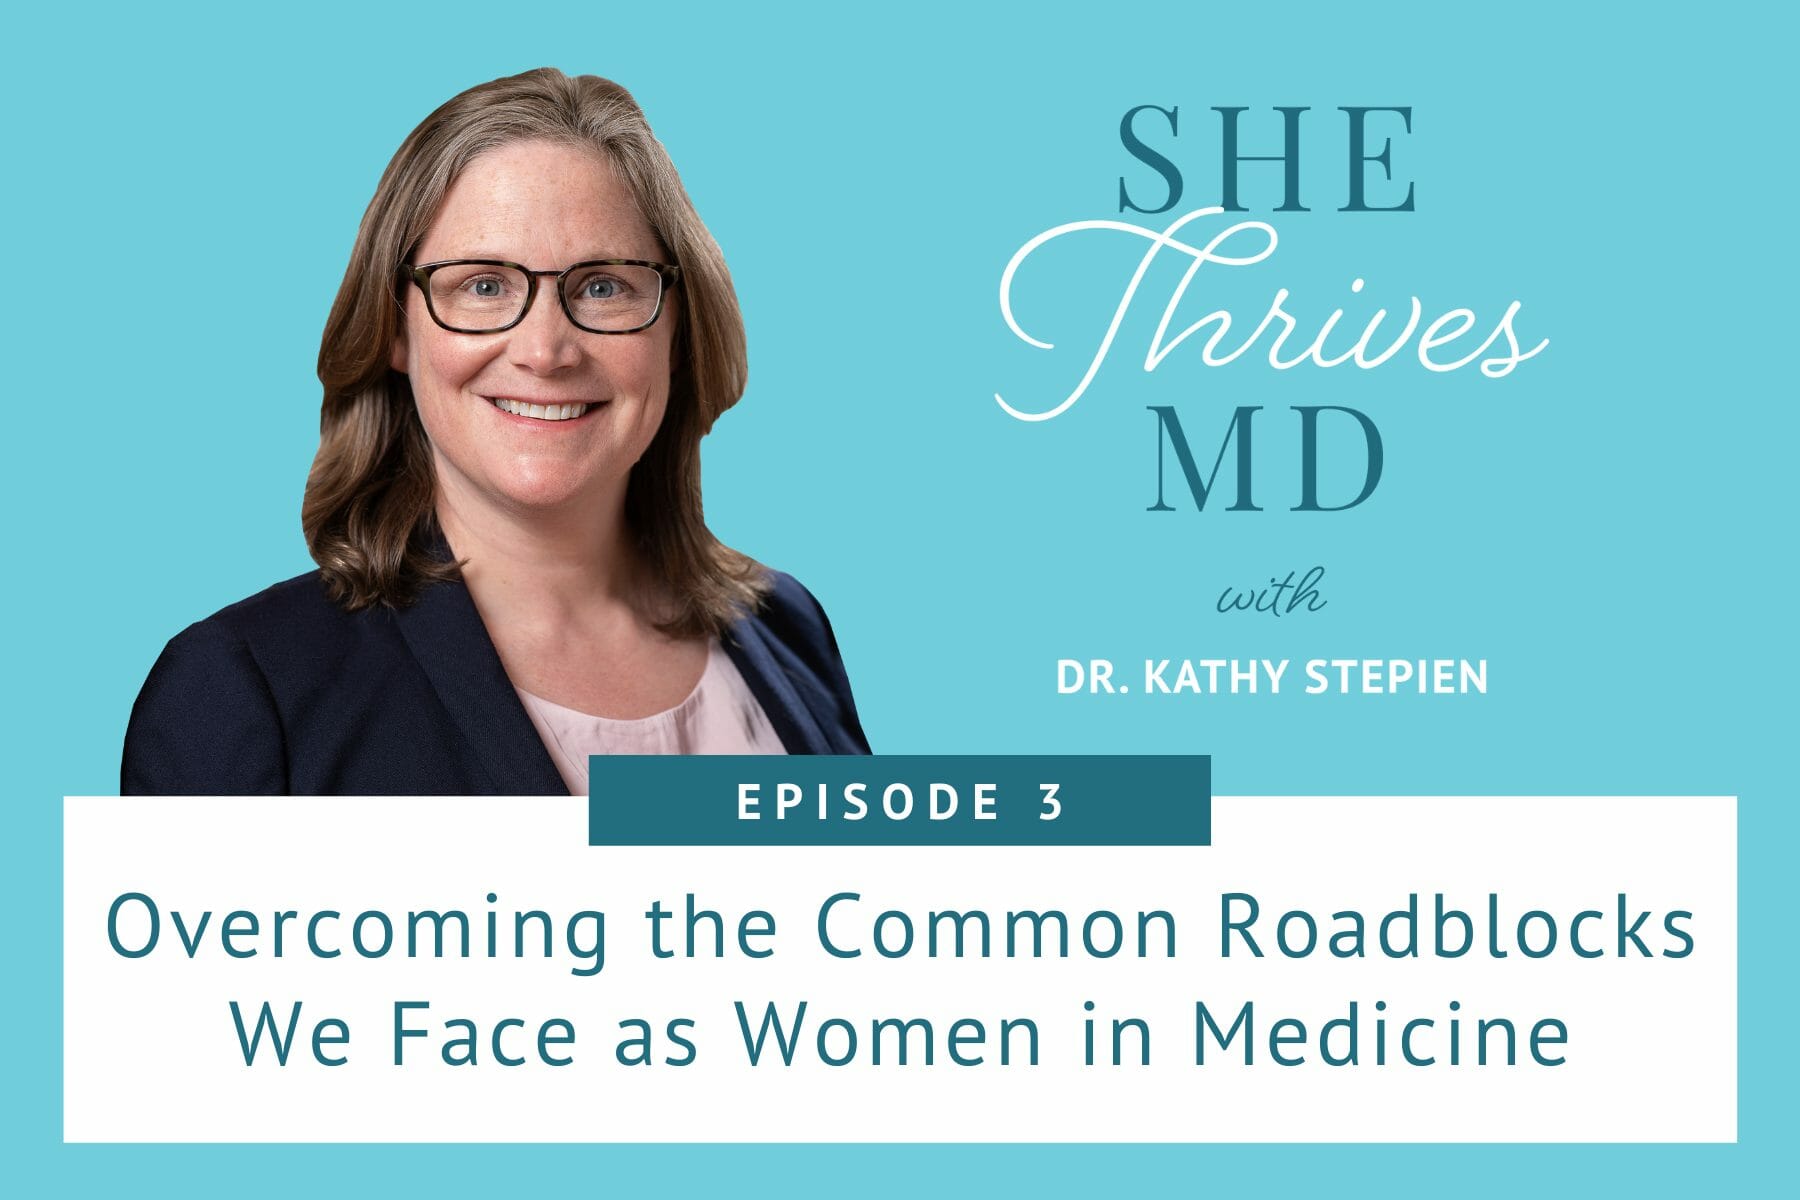 STMD ep 3 overcoming the common roadblock we face as women in medicine